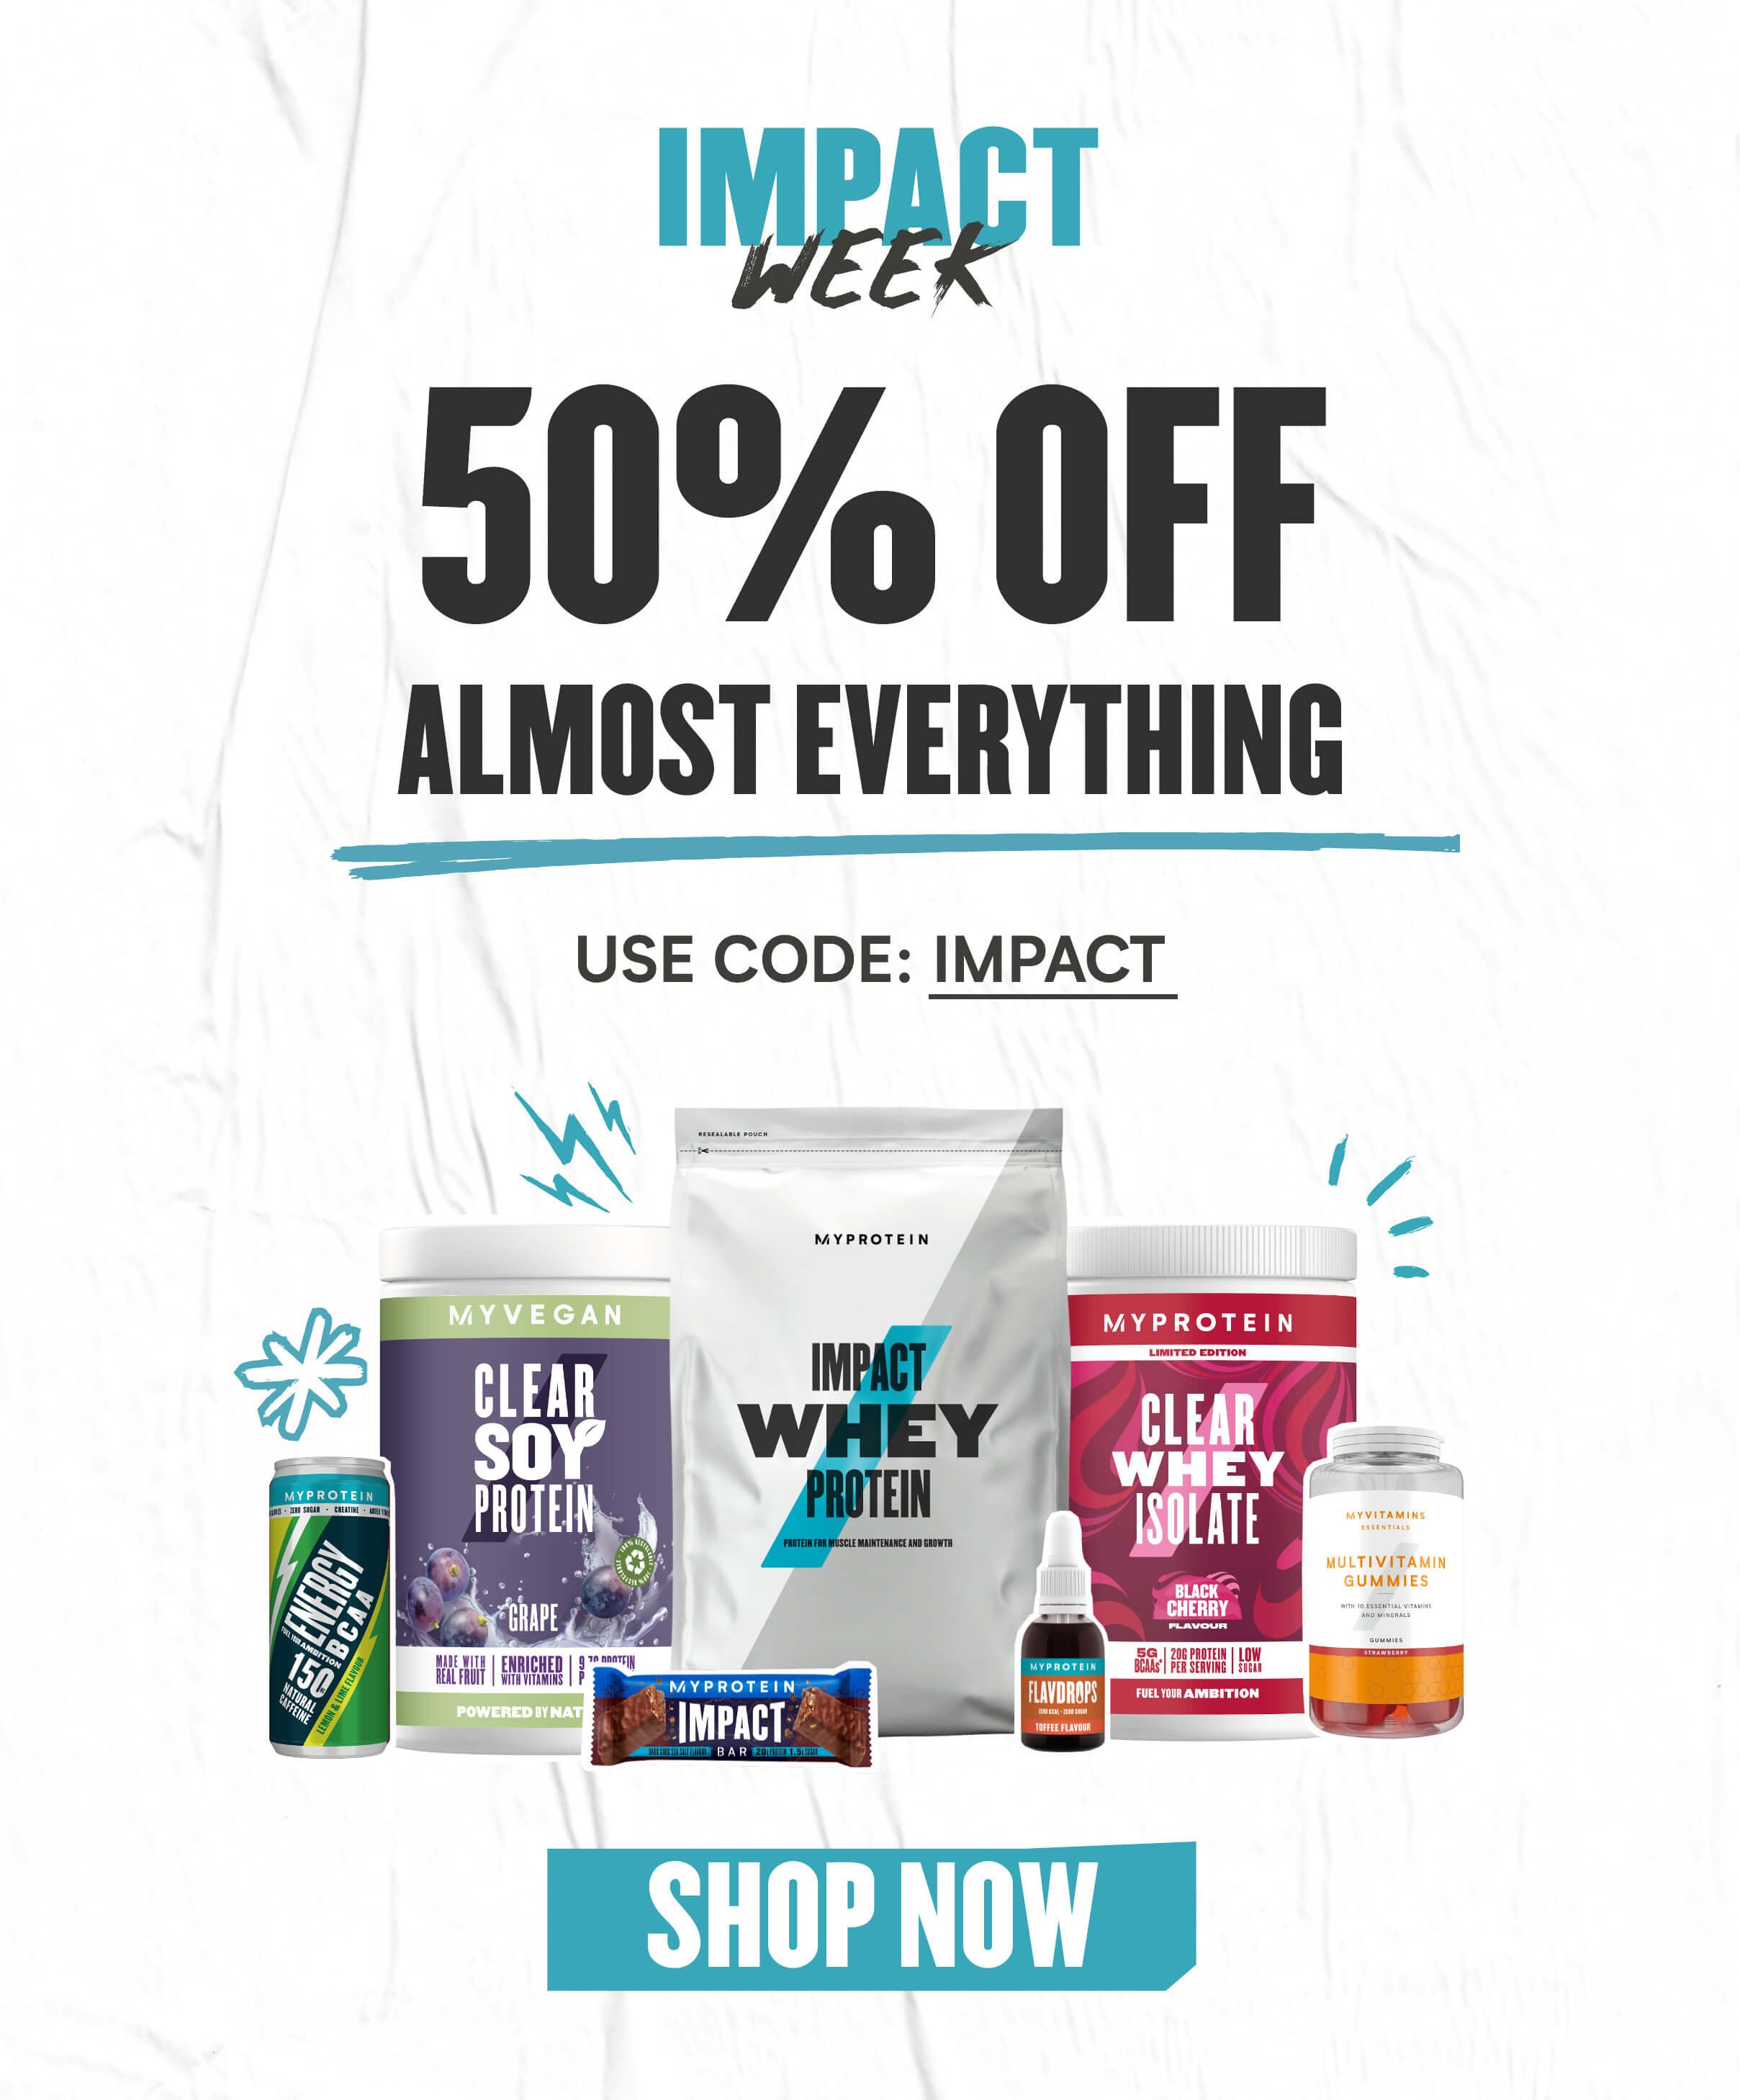 Impact Week 50% off Almost Everything